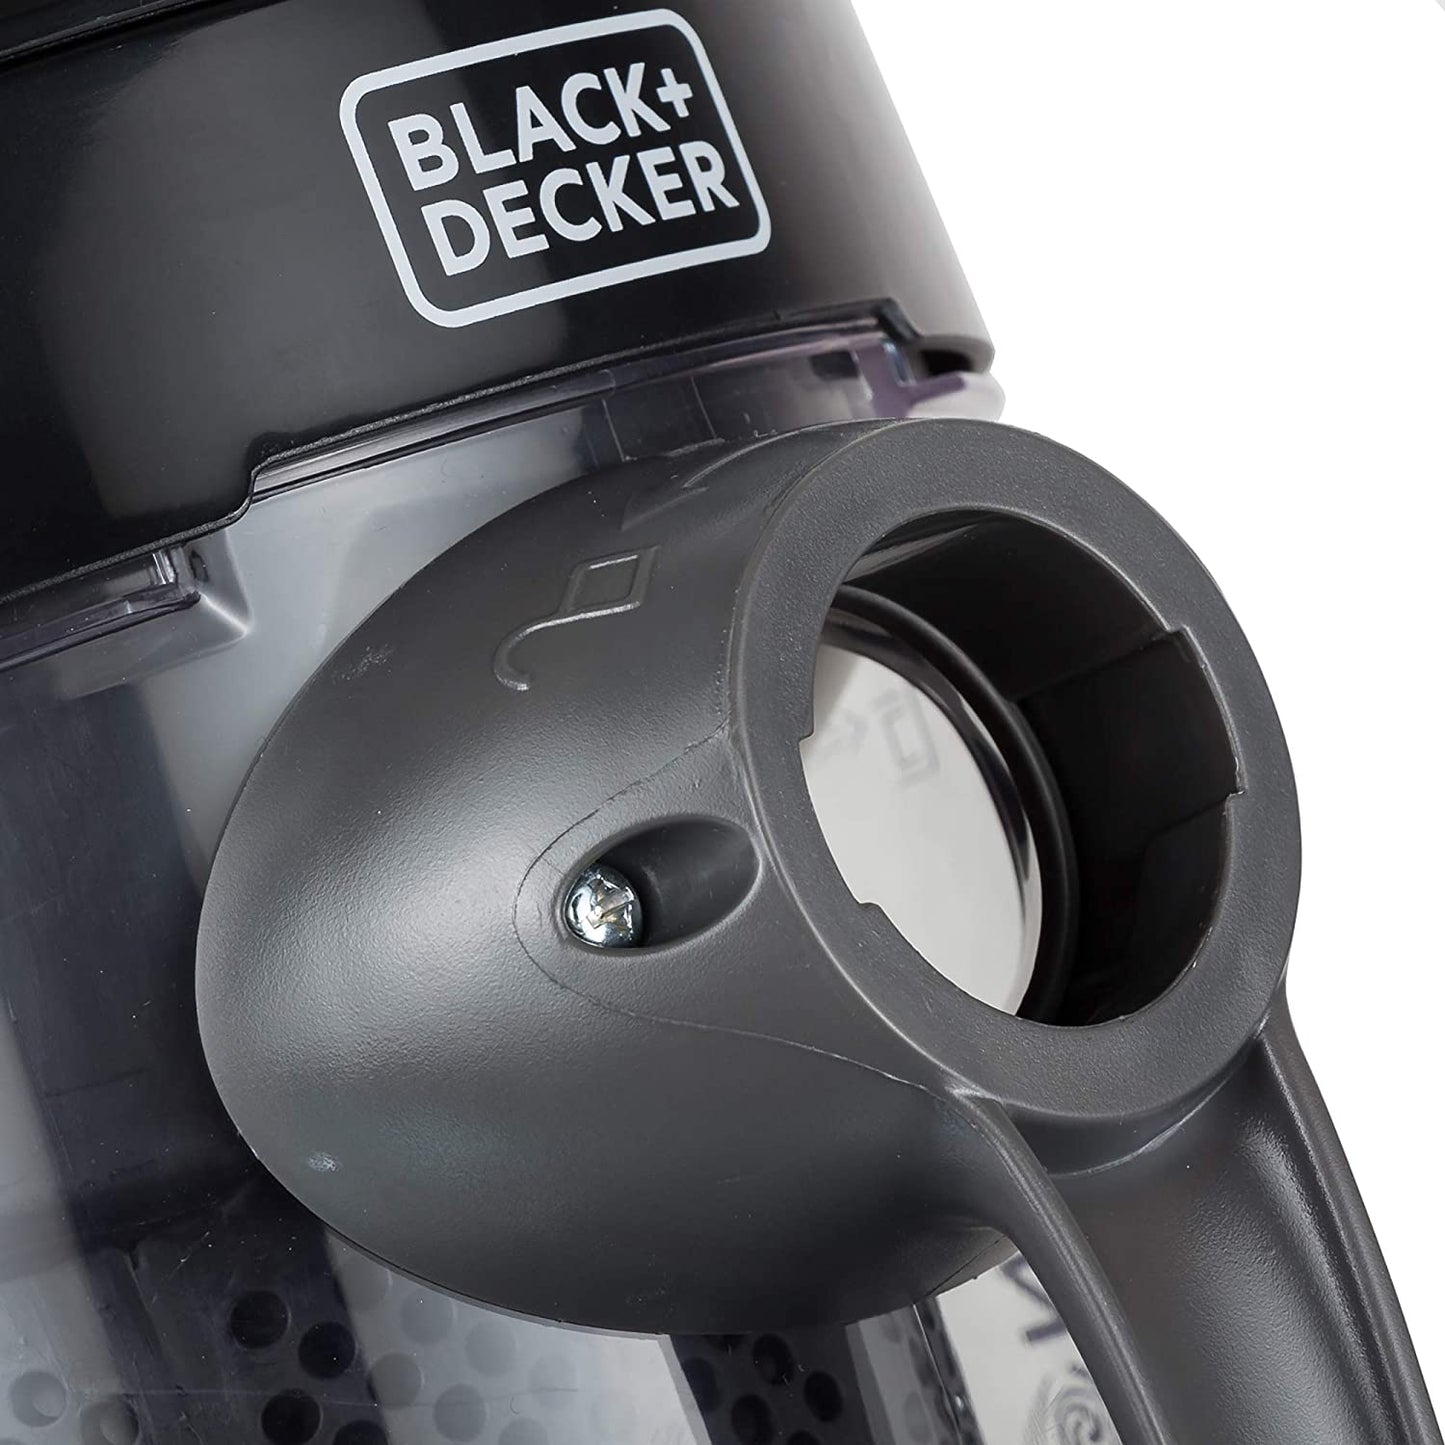 BLACK+DECKER 1480W 1.8L Corded Vacuum Cleaner 18KPa Suction Power Multi-Cyclonic Bagless Vacuum with 6 Stage Filtration, 1.5M 360-degree Swivel Hose And Washable Filter VM1480 2 Years Warranty